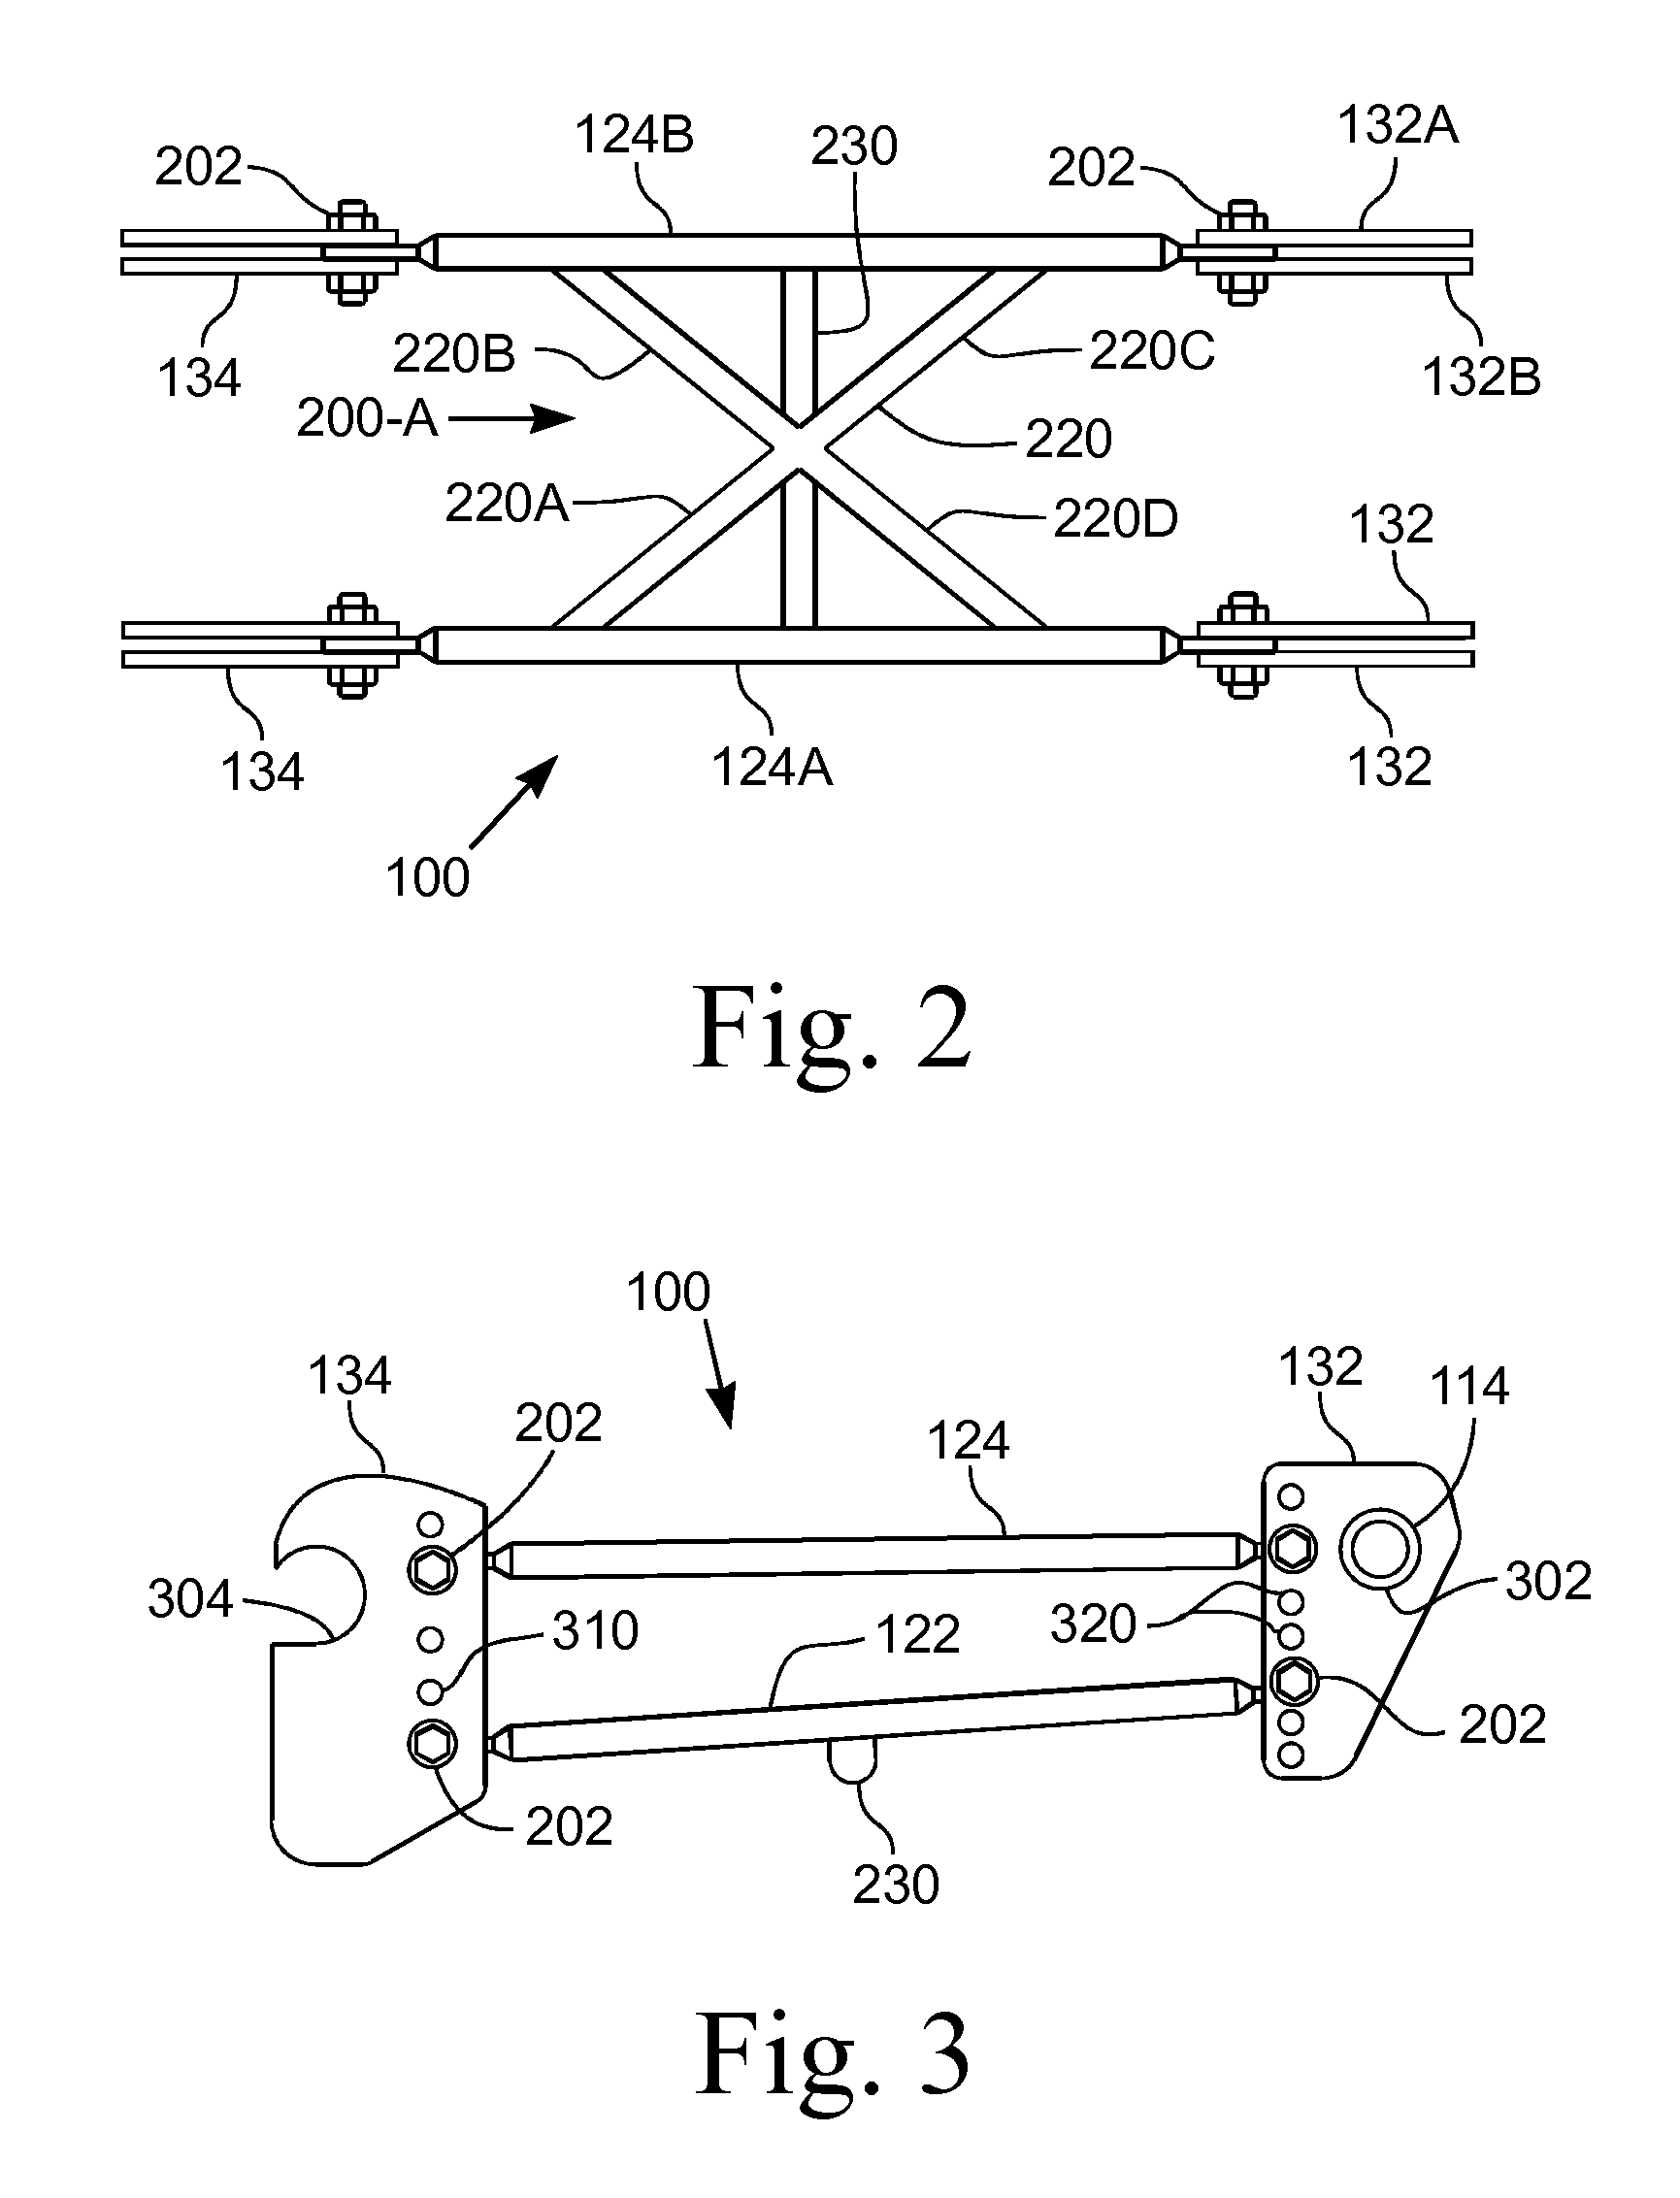 Rear suspension assembly for a drag racing vehicle